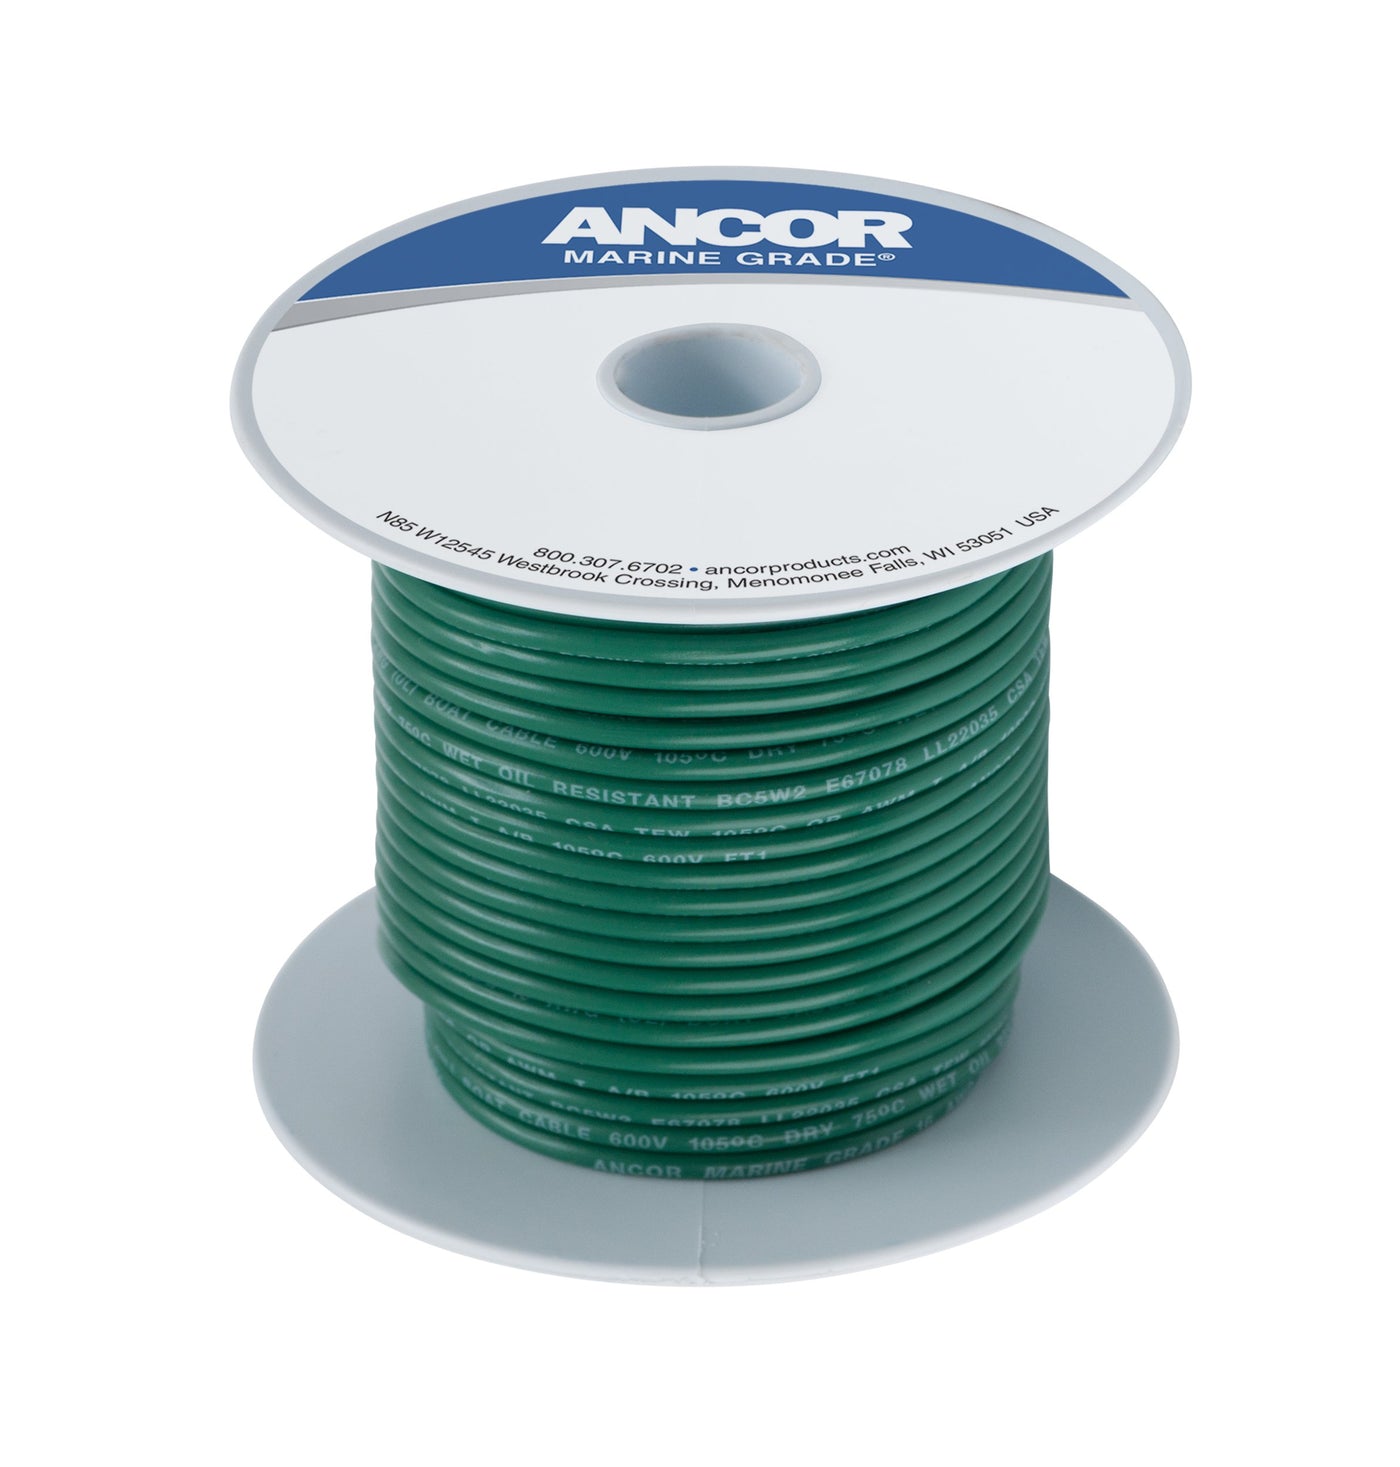 Ancor 112325 Tinned Copper Wire, 6 AWG (13mm²), Green - 250ft